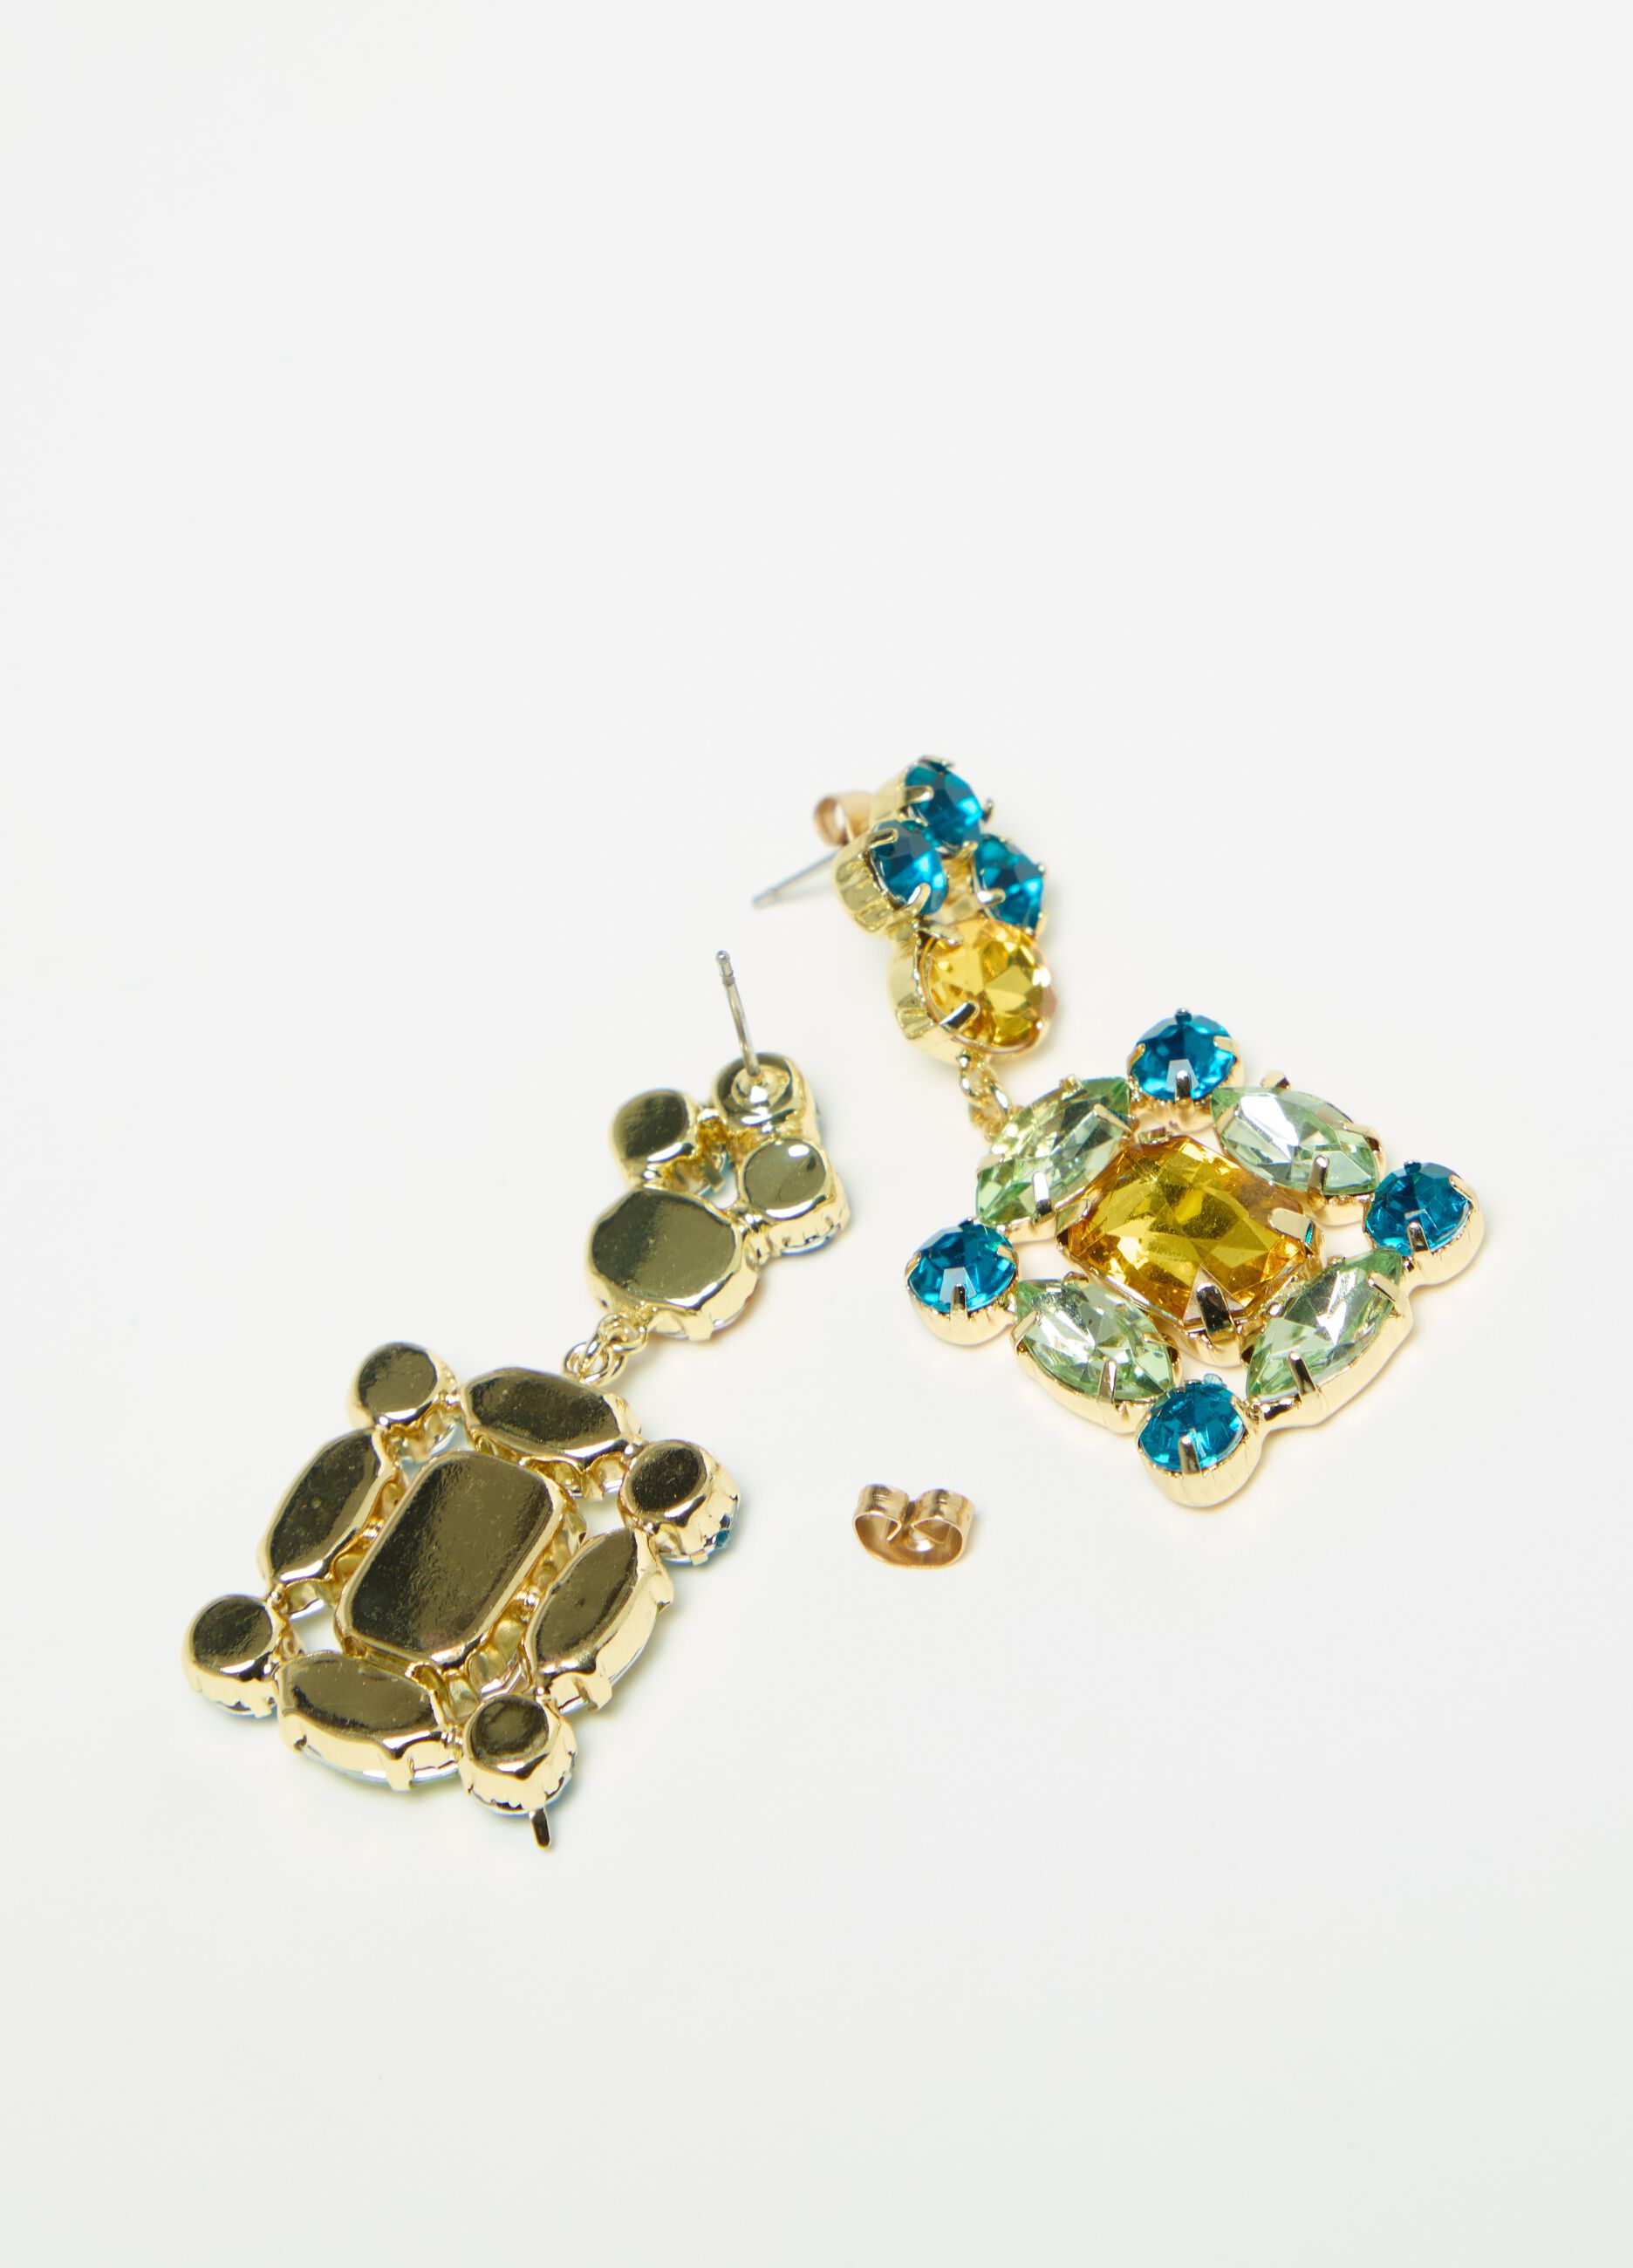 Pendant earrings with stones